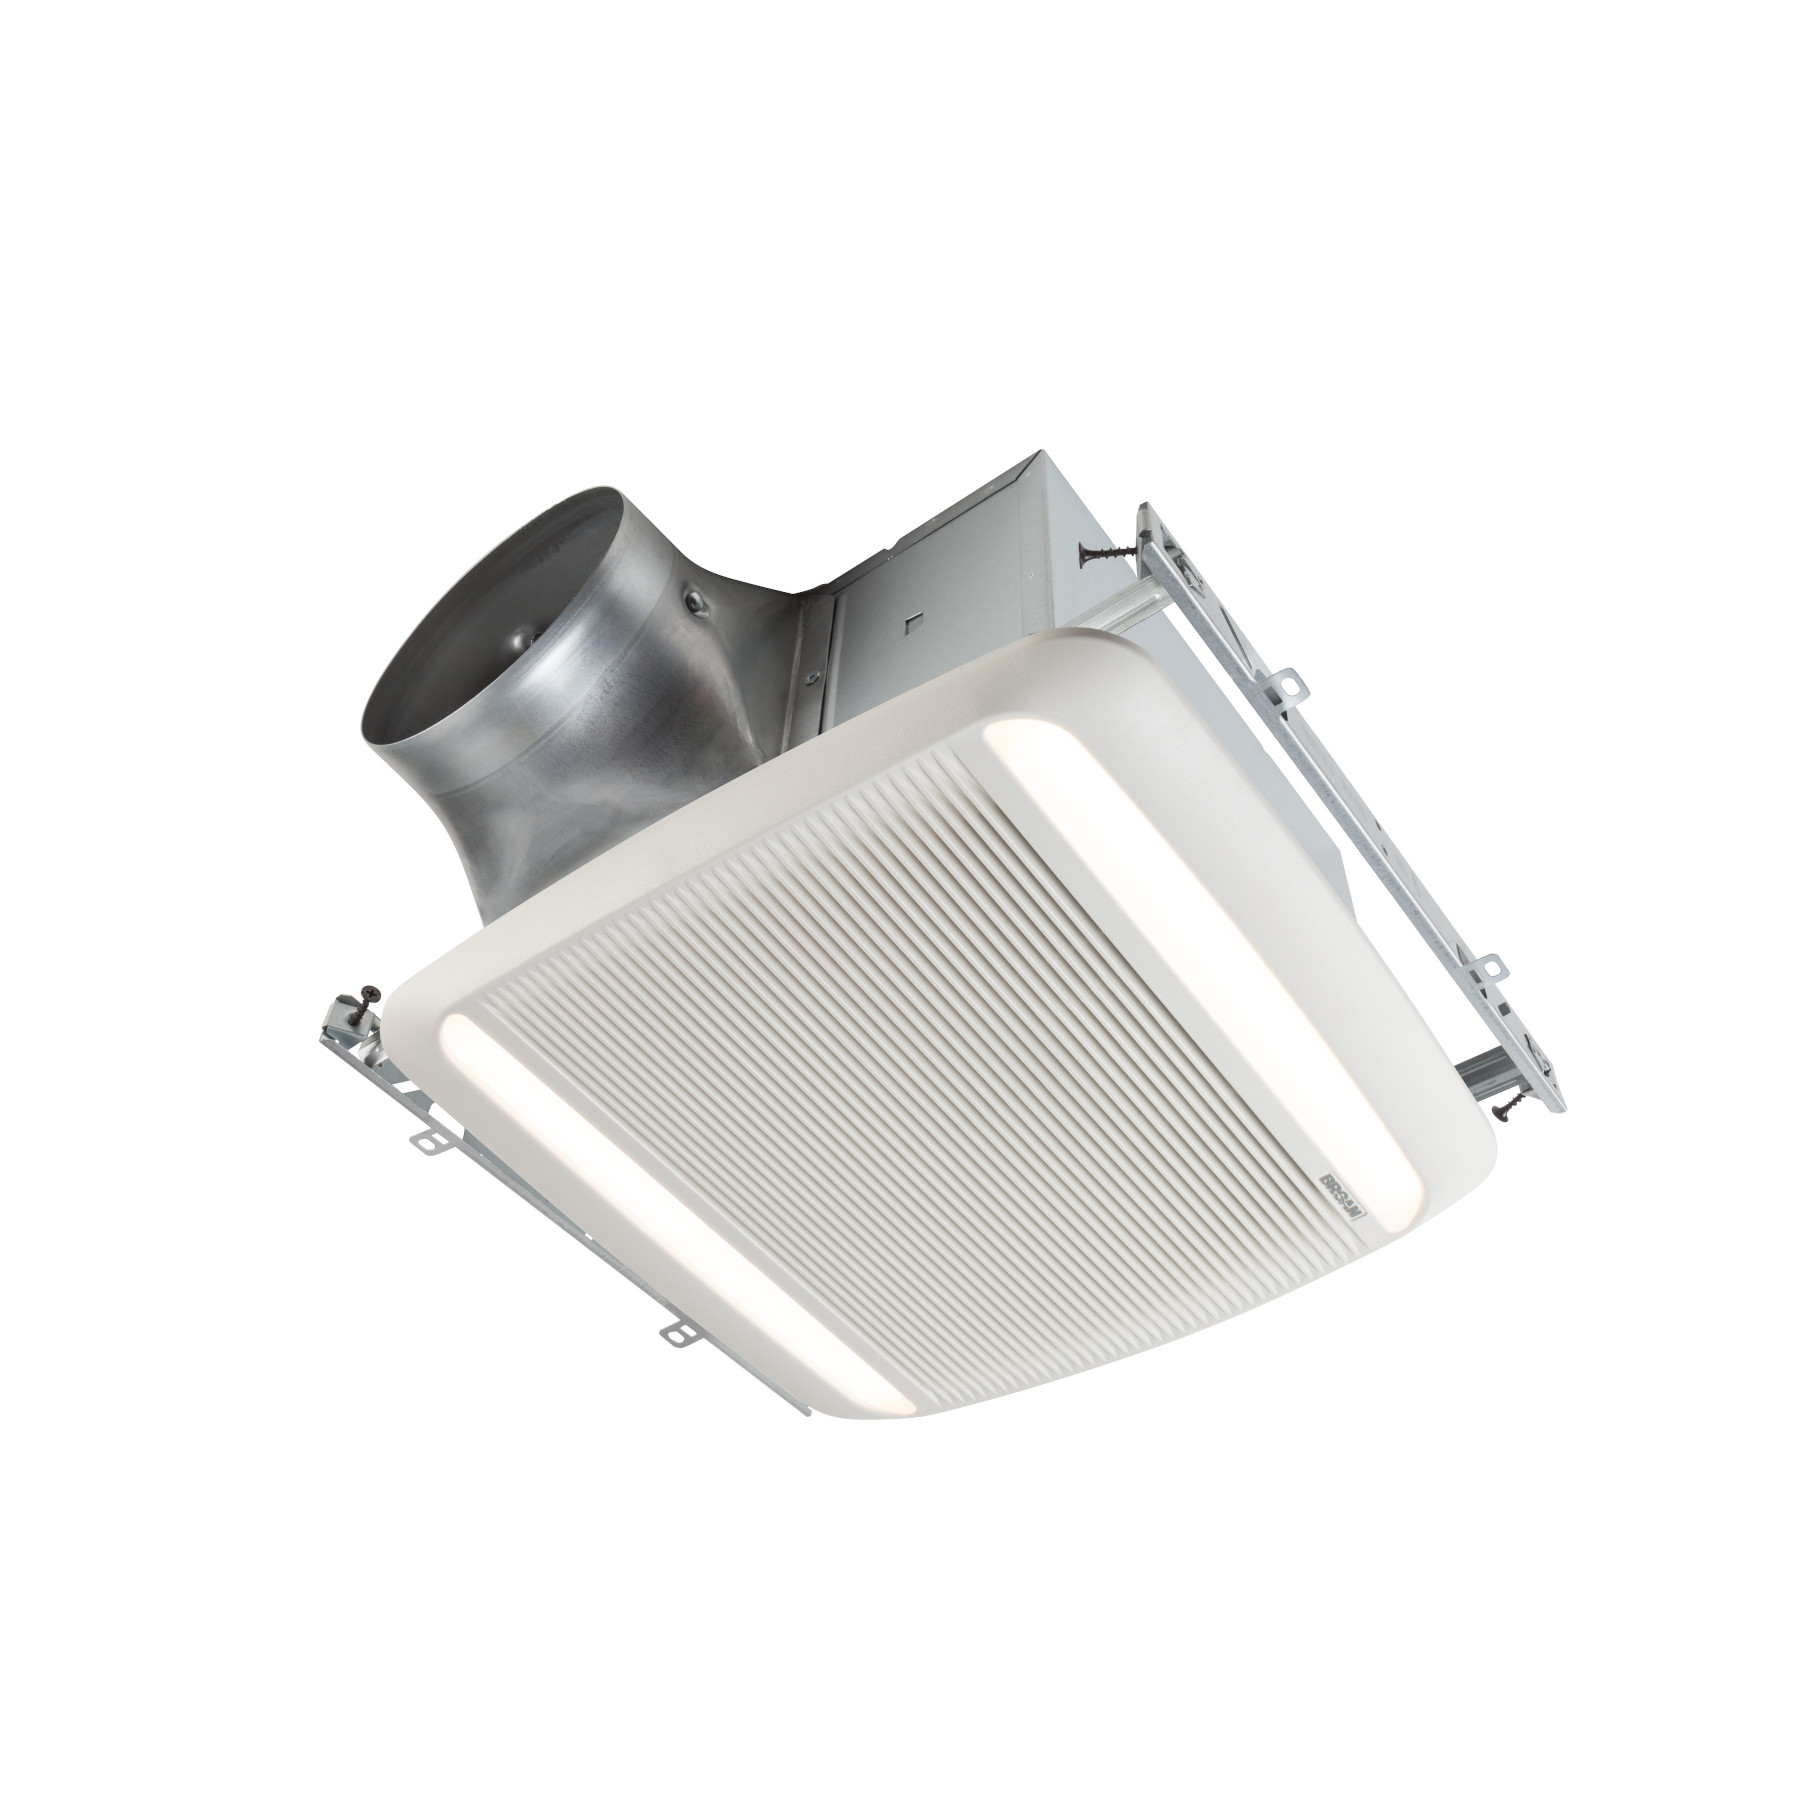 ULTRA GREEN ZB Series 80 CFM Multi-Speed Ceiling Bathroom Exhaust Fan with LED Light, ENERGY STAR® certified